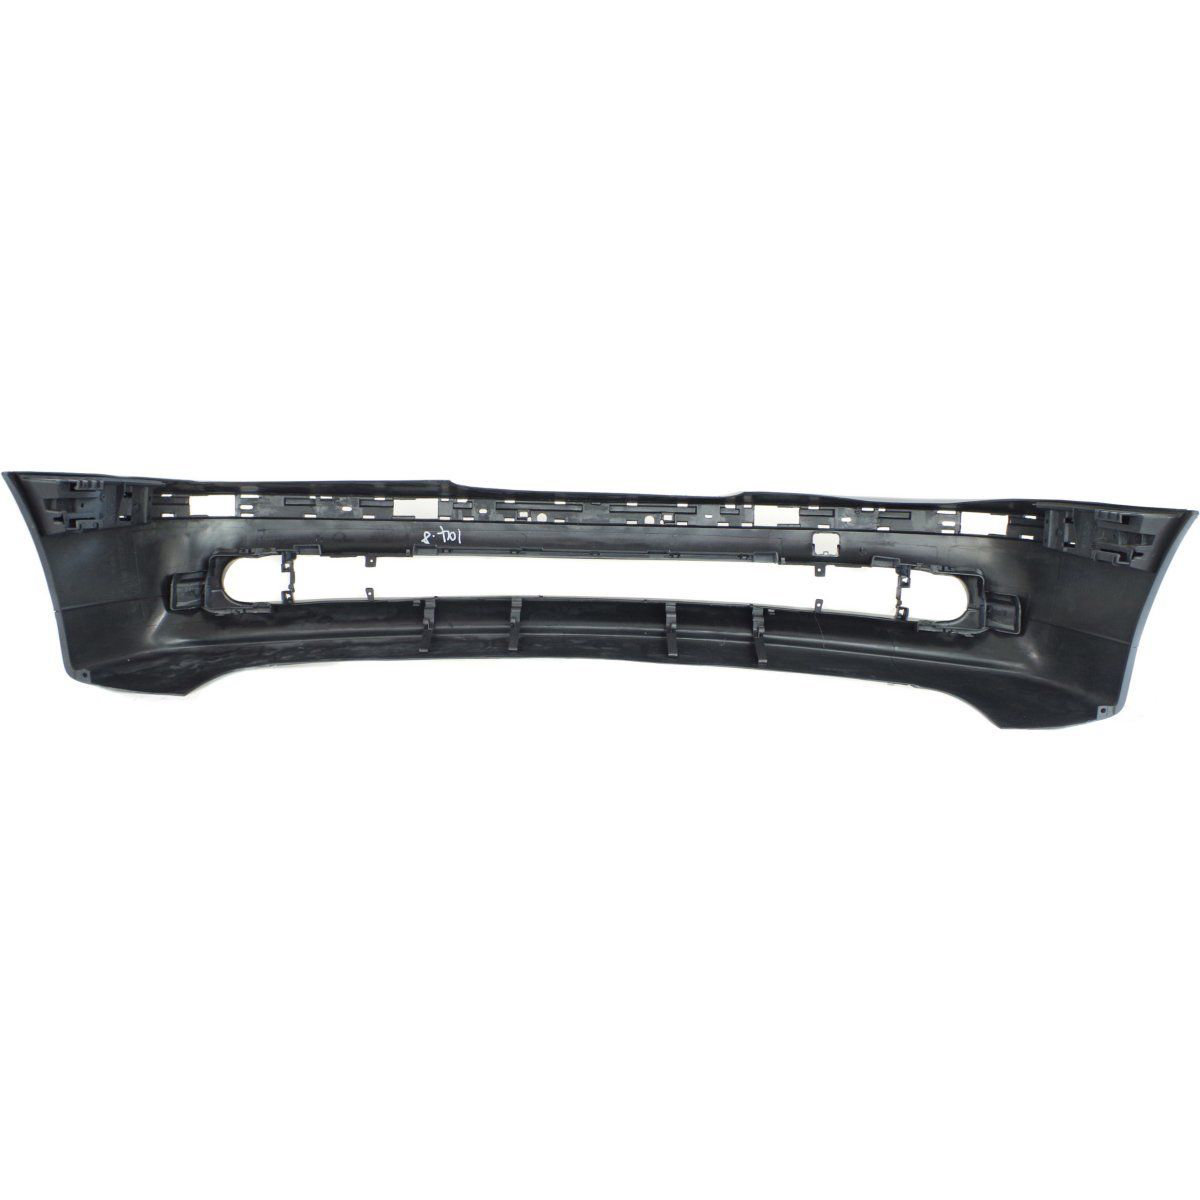 2001-2003 BMW 5-SERIES Front Bumper Cover w/o headlamp washer Painted to Match